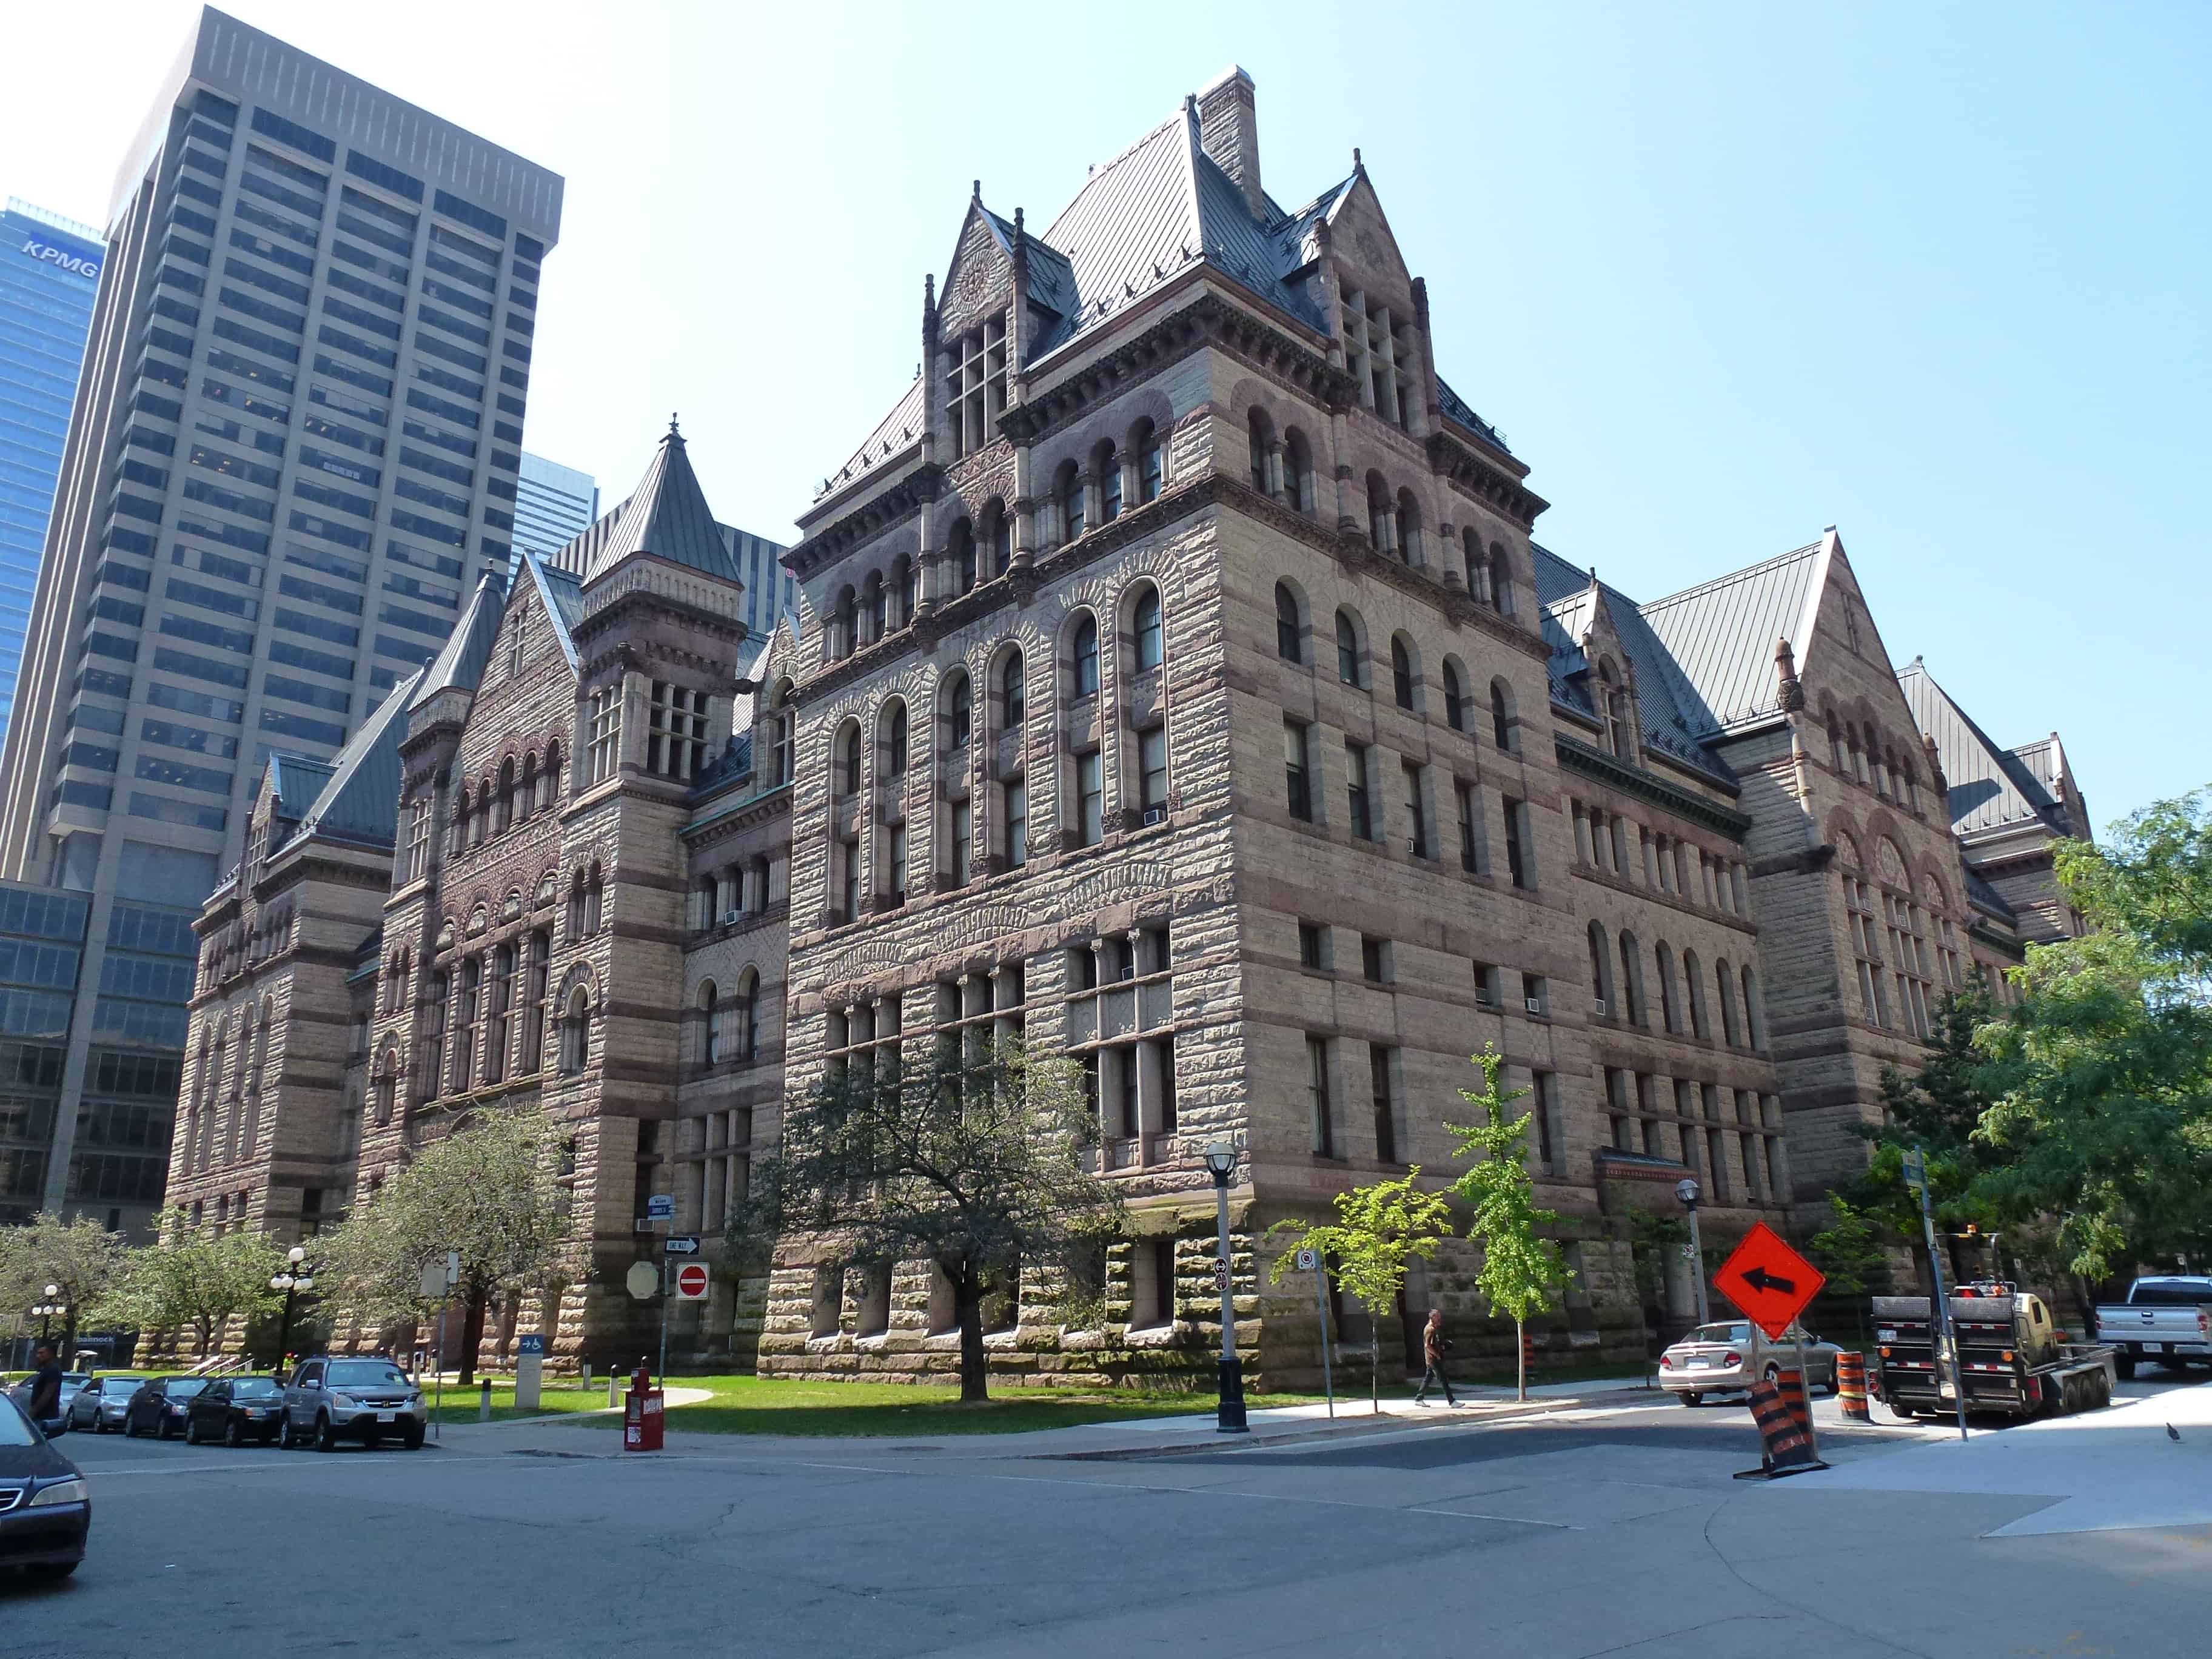 Old City Hall in Toronto, Ontario, Canada